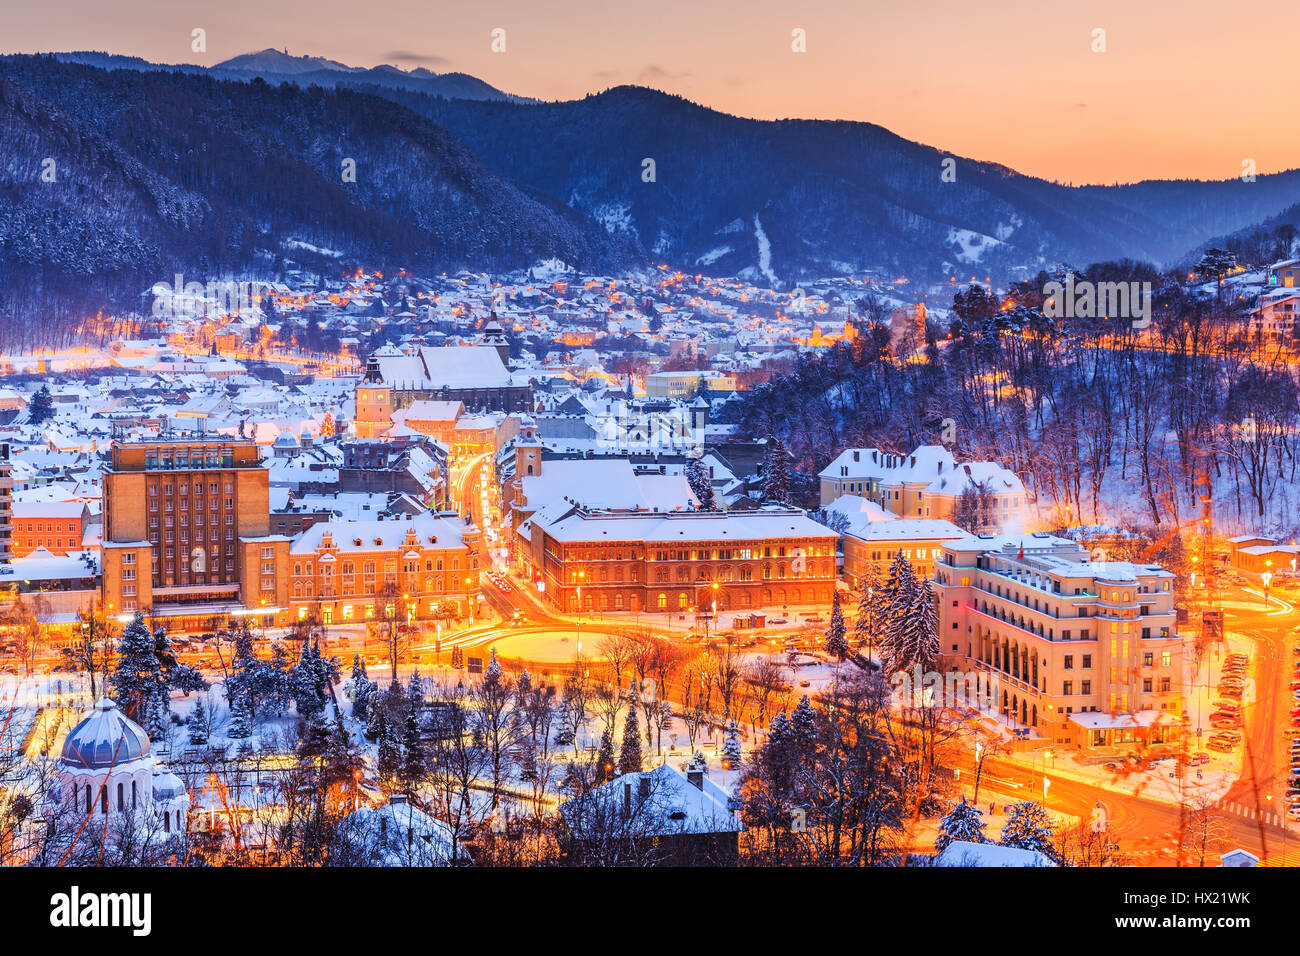 Brasov, Romania. Old town during the winter at sunset. Stock Photo